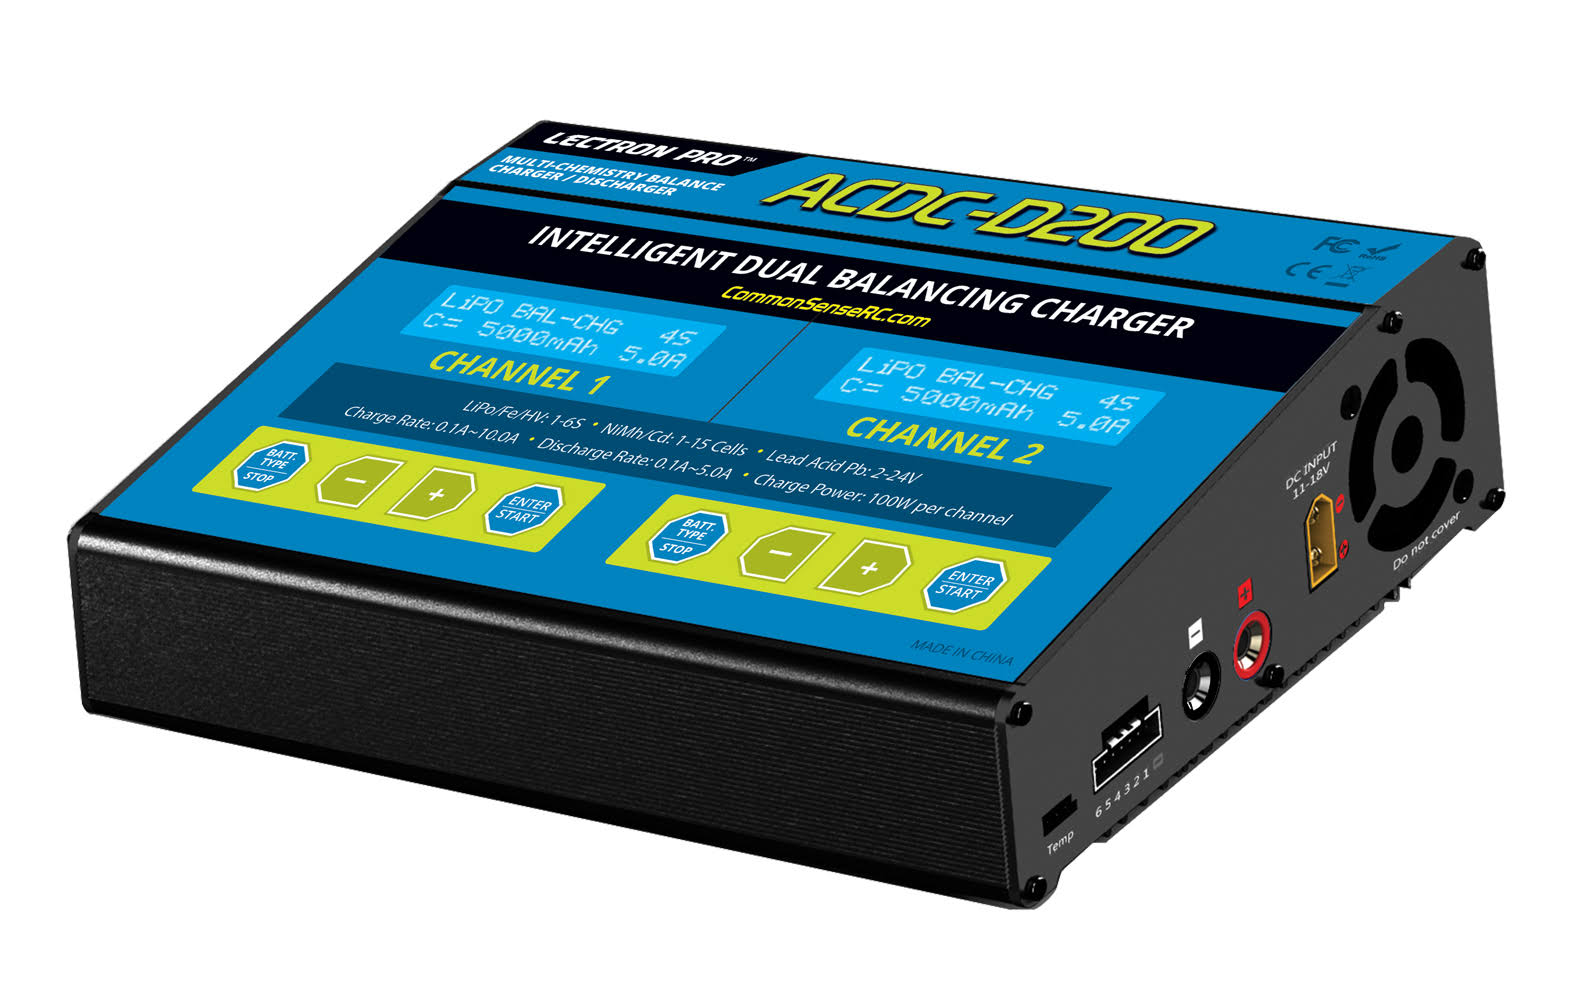 Duo Max - 200W 10A Two-Port Multi-Chemistry Balancing Charger (LiPo/LiFe/LiHV/NiMH)